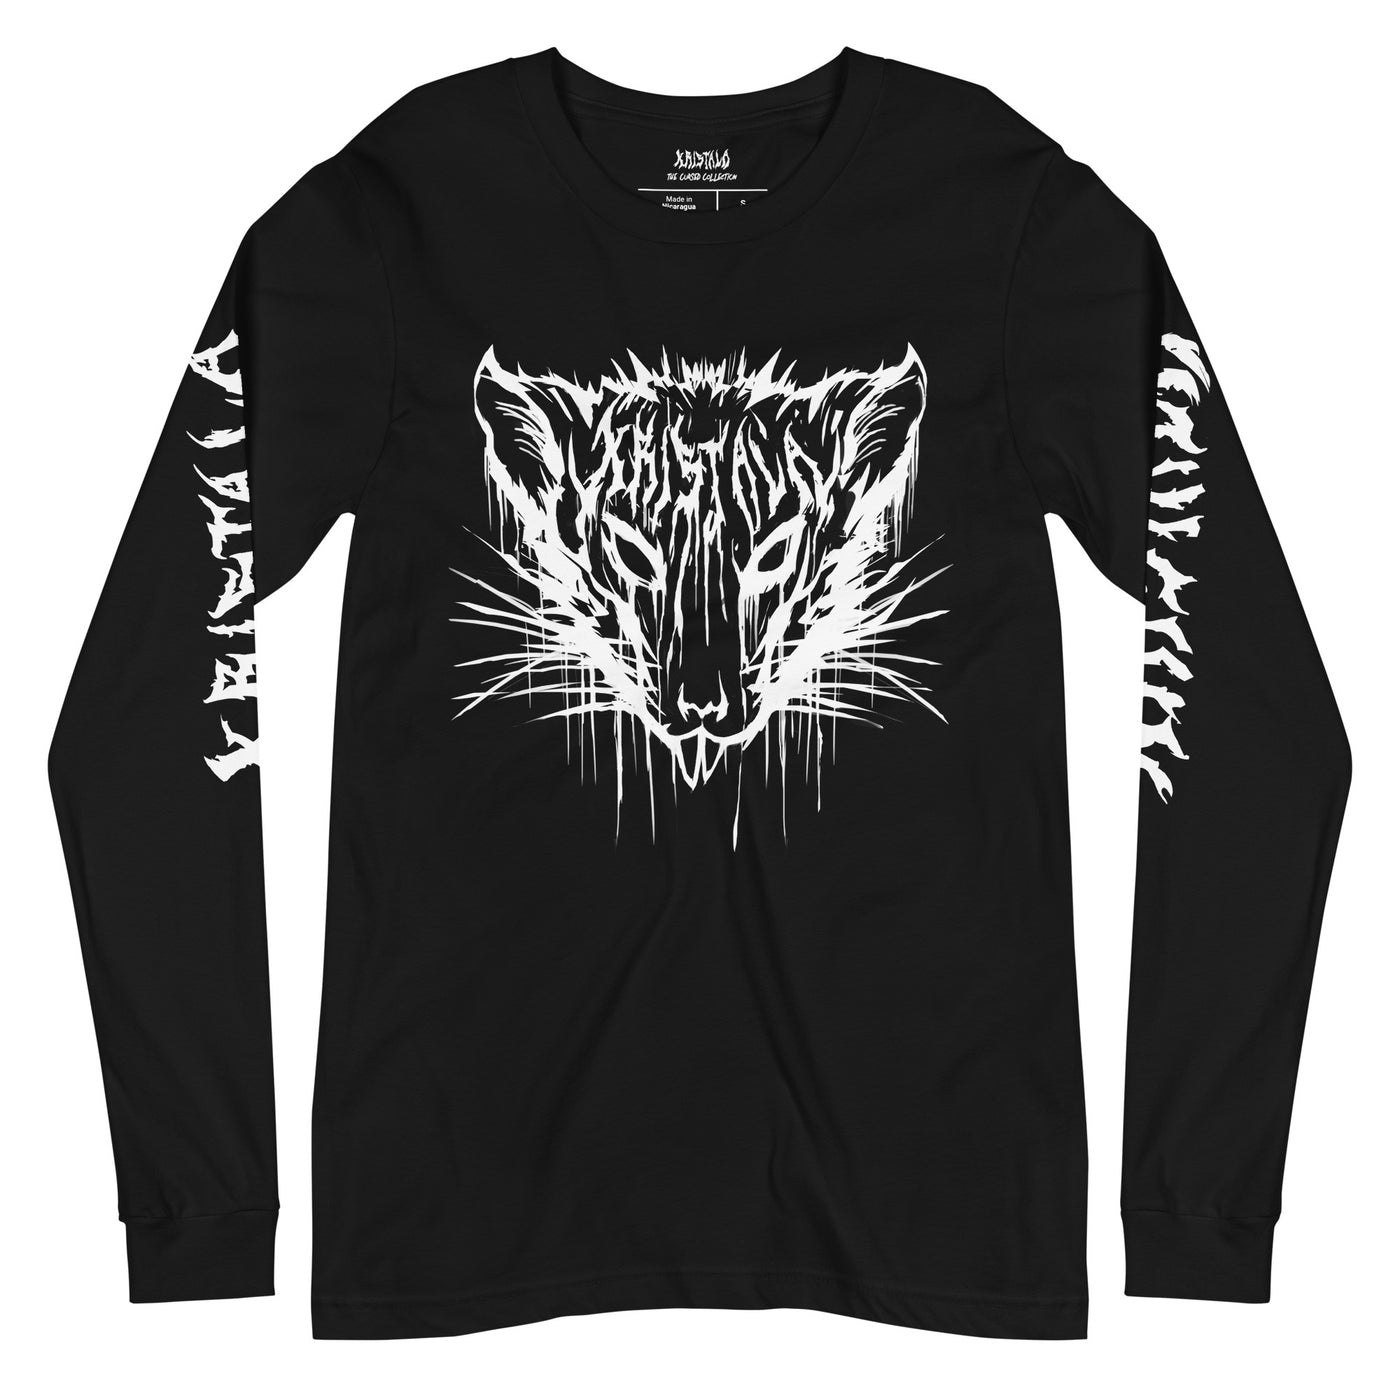 front view of black long-sleeve tee with kristala x metal voices white rat logo on the breast and kristala in metal lettering down both sleeves white background